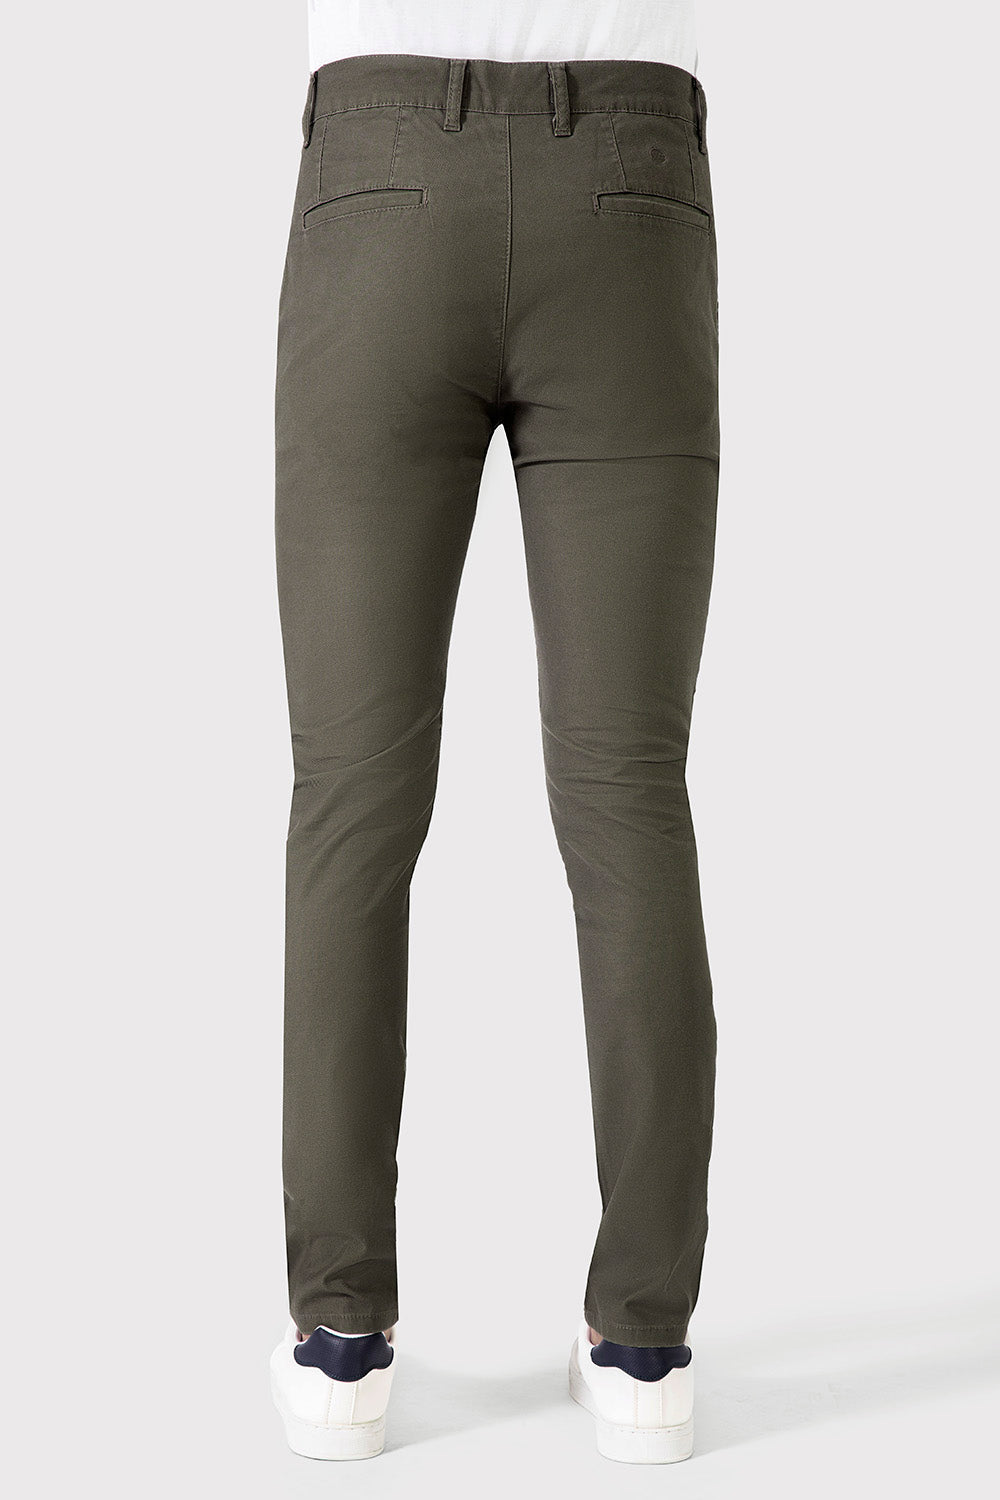 Oily Slim Fit Chino Pants